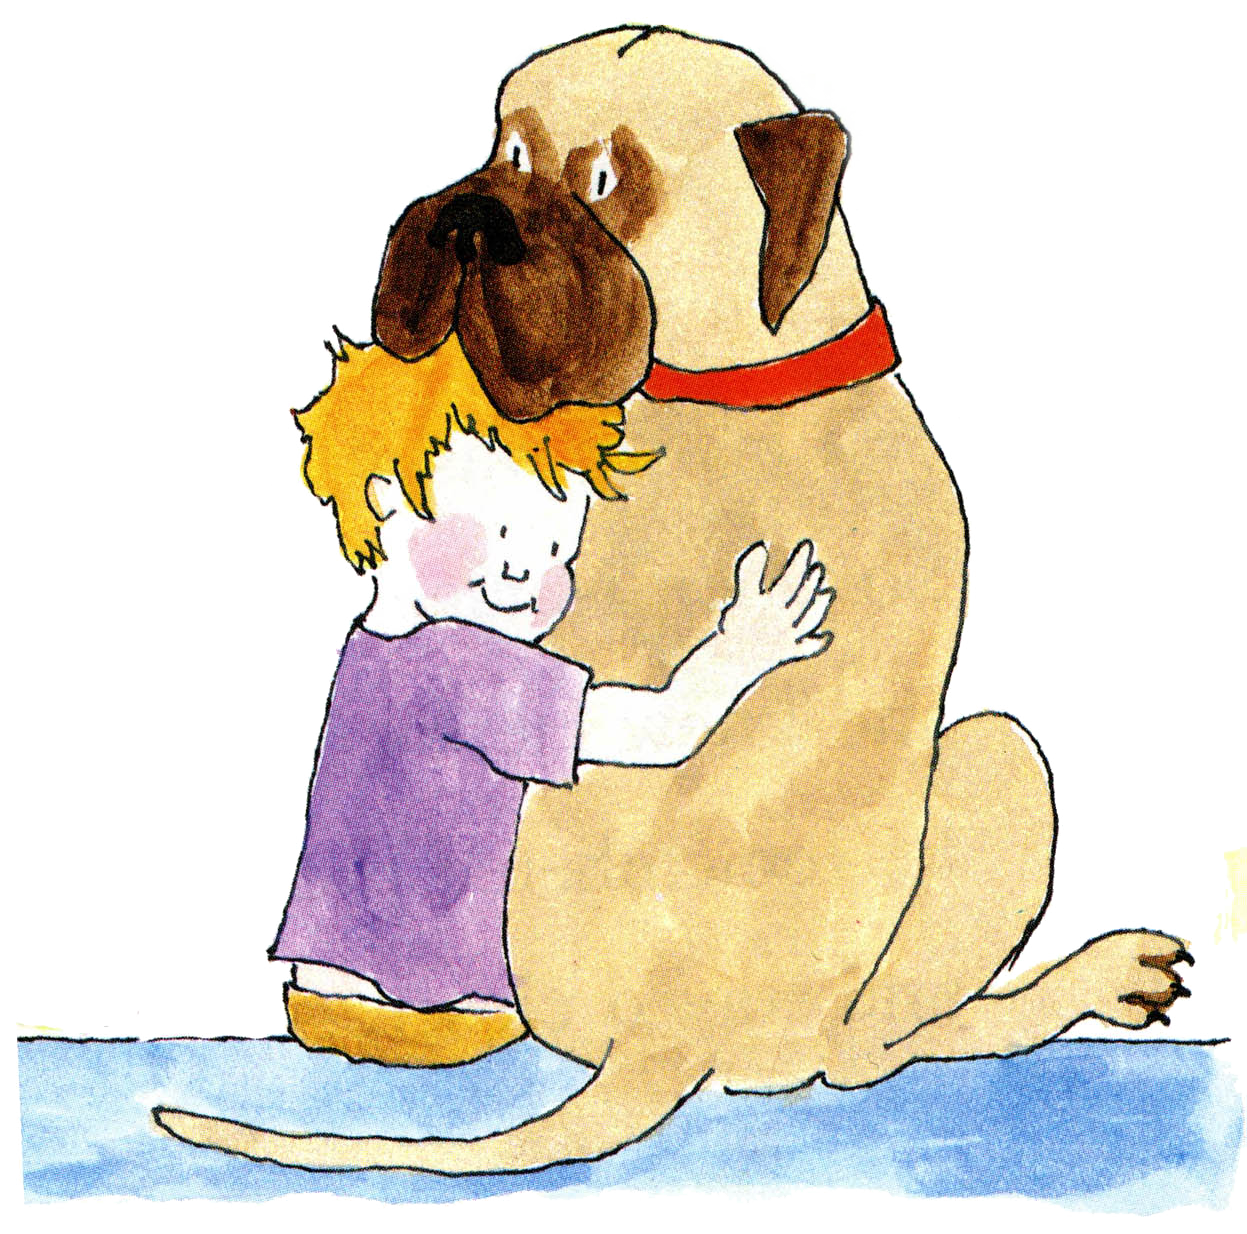 Henry And Mudge PNG-PlusPNG.c